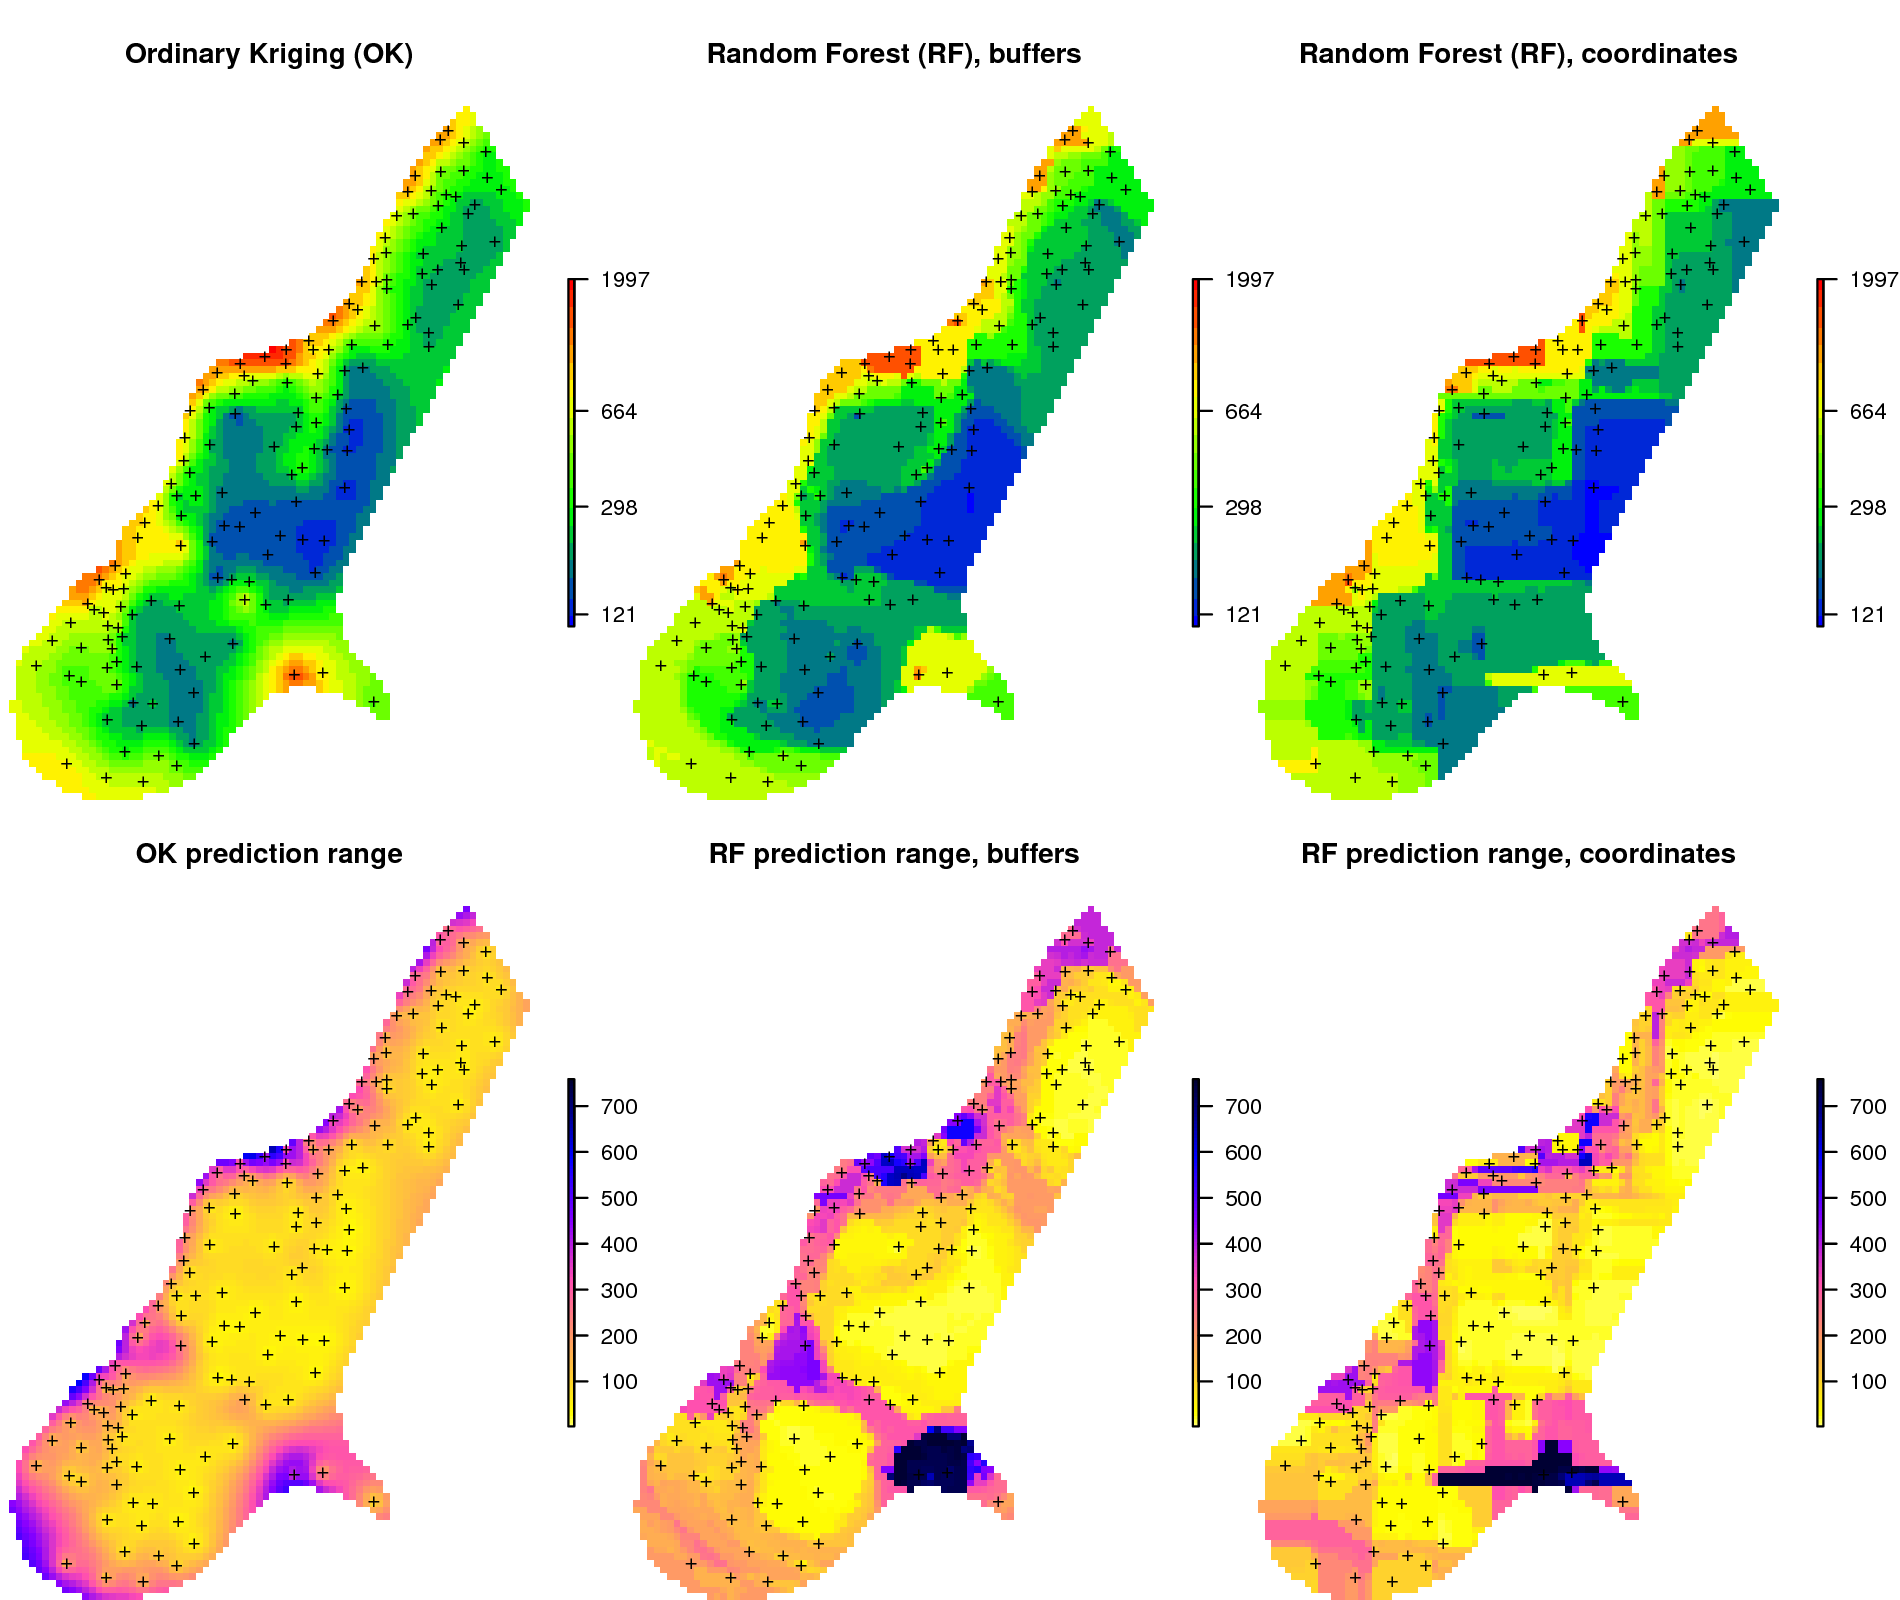 Comparison of predictions based on ordinary kriging as implemented in the geoR package (left) and random forest (right) for Zinc concentrations, Meuse data set: (first row) predicted concentrations in log-scale and (second row) standard deviation of the prediction errors for OK and RF methods. Image source: Hengl et al. (2018) doi: 10.7717/peerj.5518.